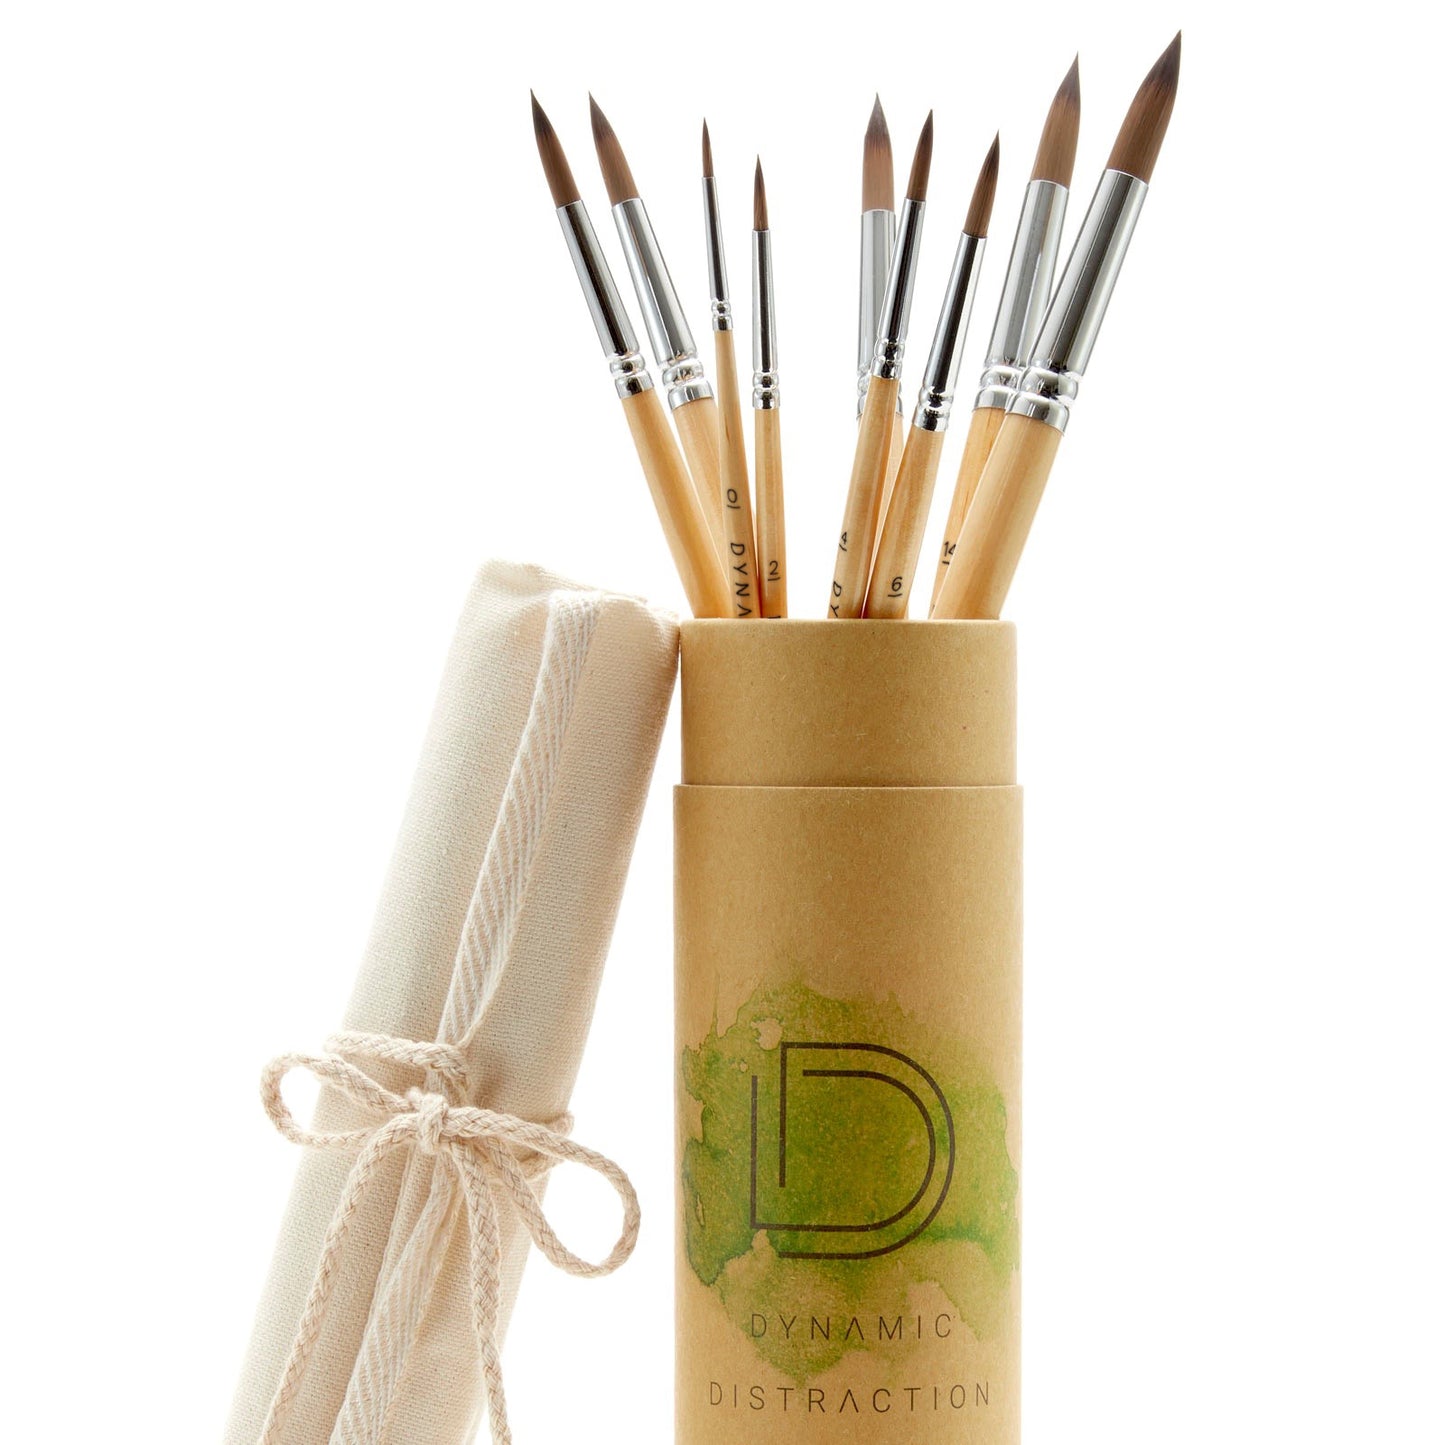 Dyiom 135x40mm watercolor brushes, cleanup brushes, paint brushes